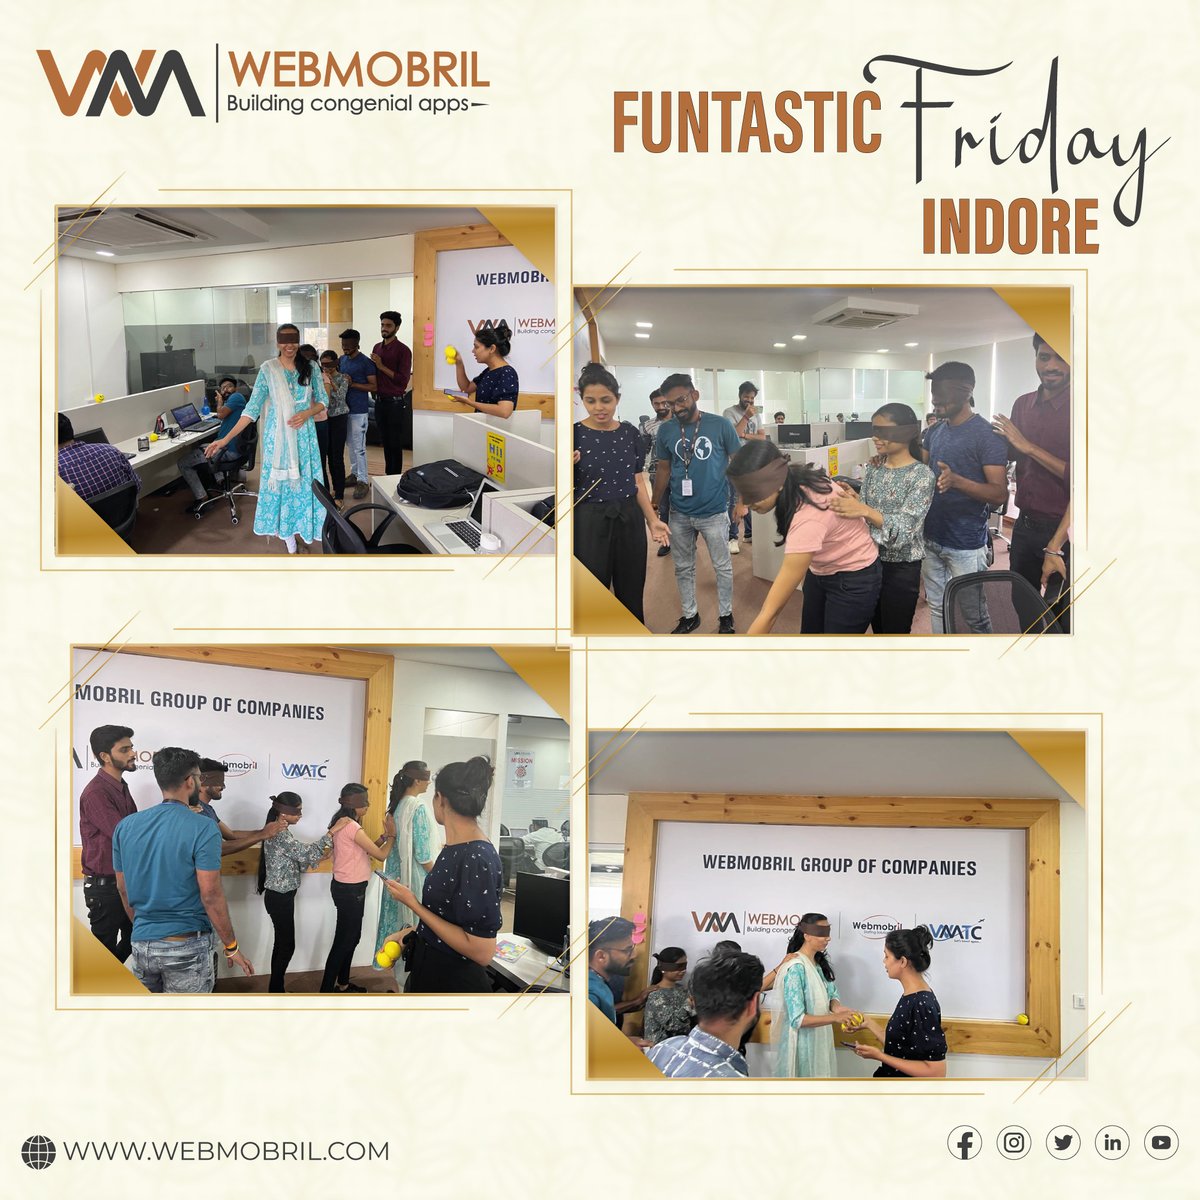 At WebMobril, we believe in ending our week on a happy note and here's a glimpse of our 'FunTastic Friday'!
#BalloonPyramid #funfriday #blindfolded #damsharas #FunTasticActivities #funloaded #challenge #motivation #fun #enjoy #gametime #funfriday #weekendvibes #weekendmood